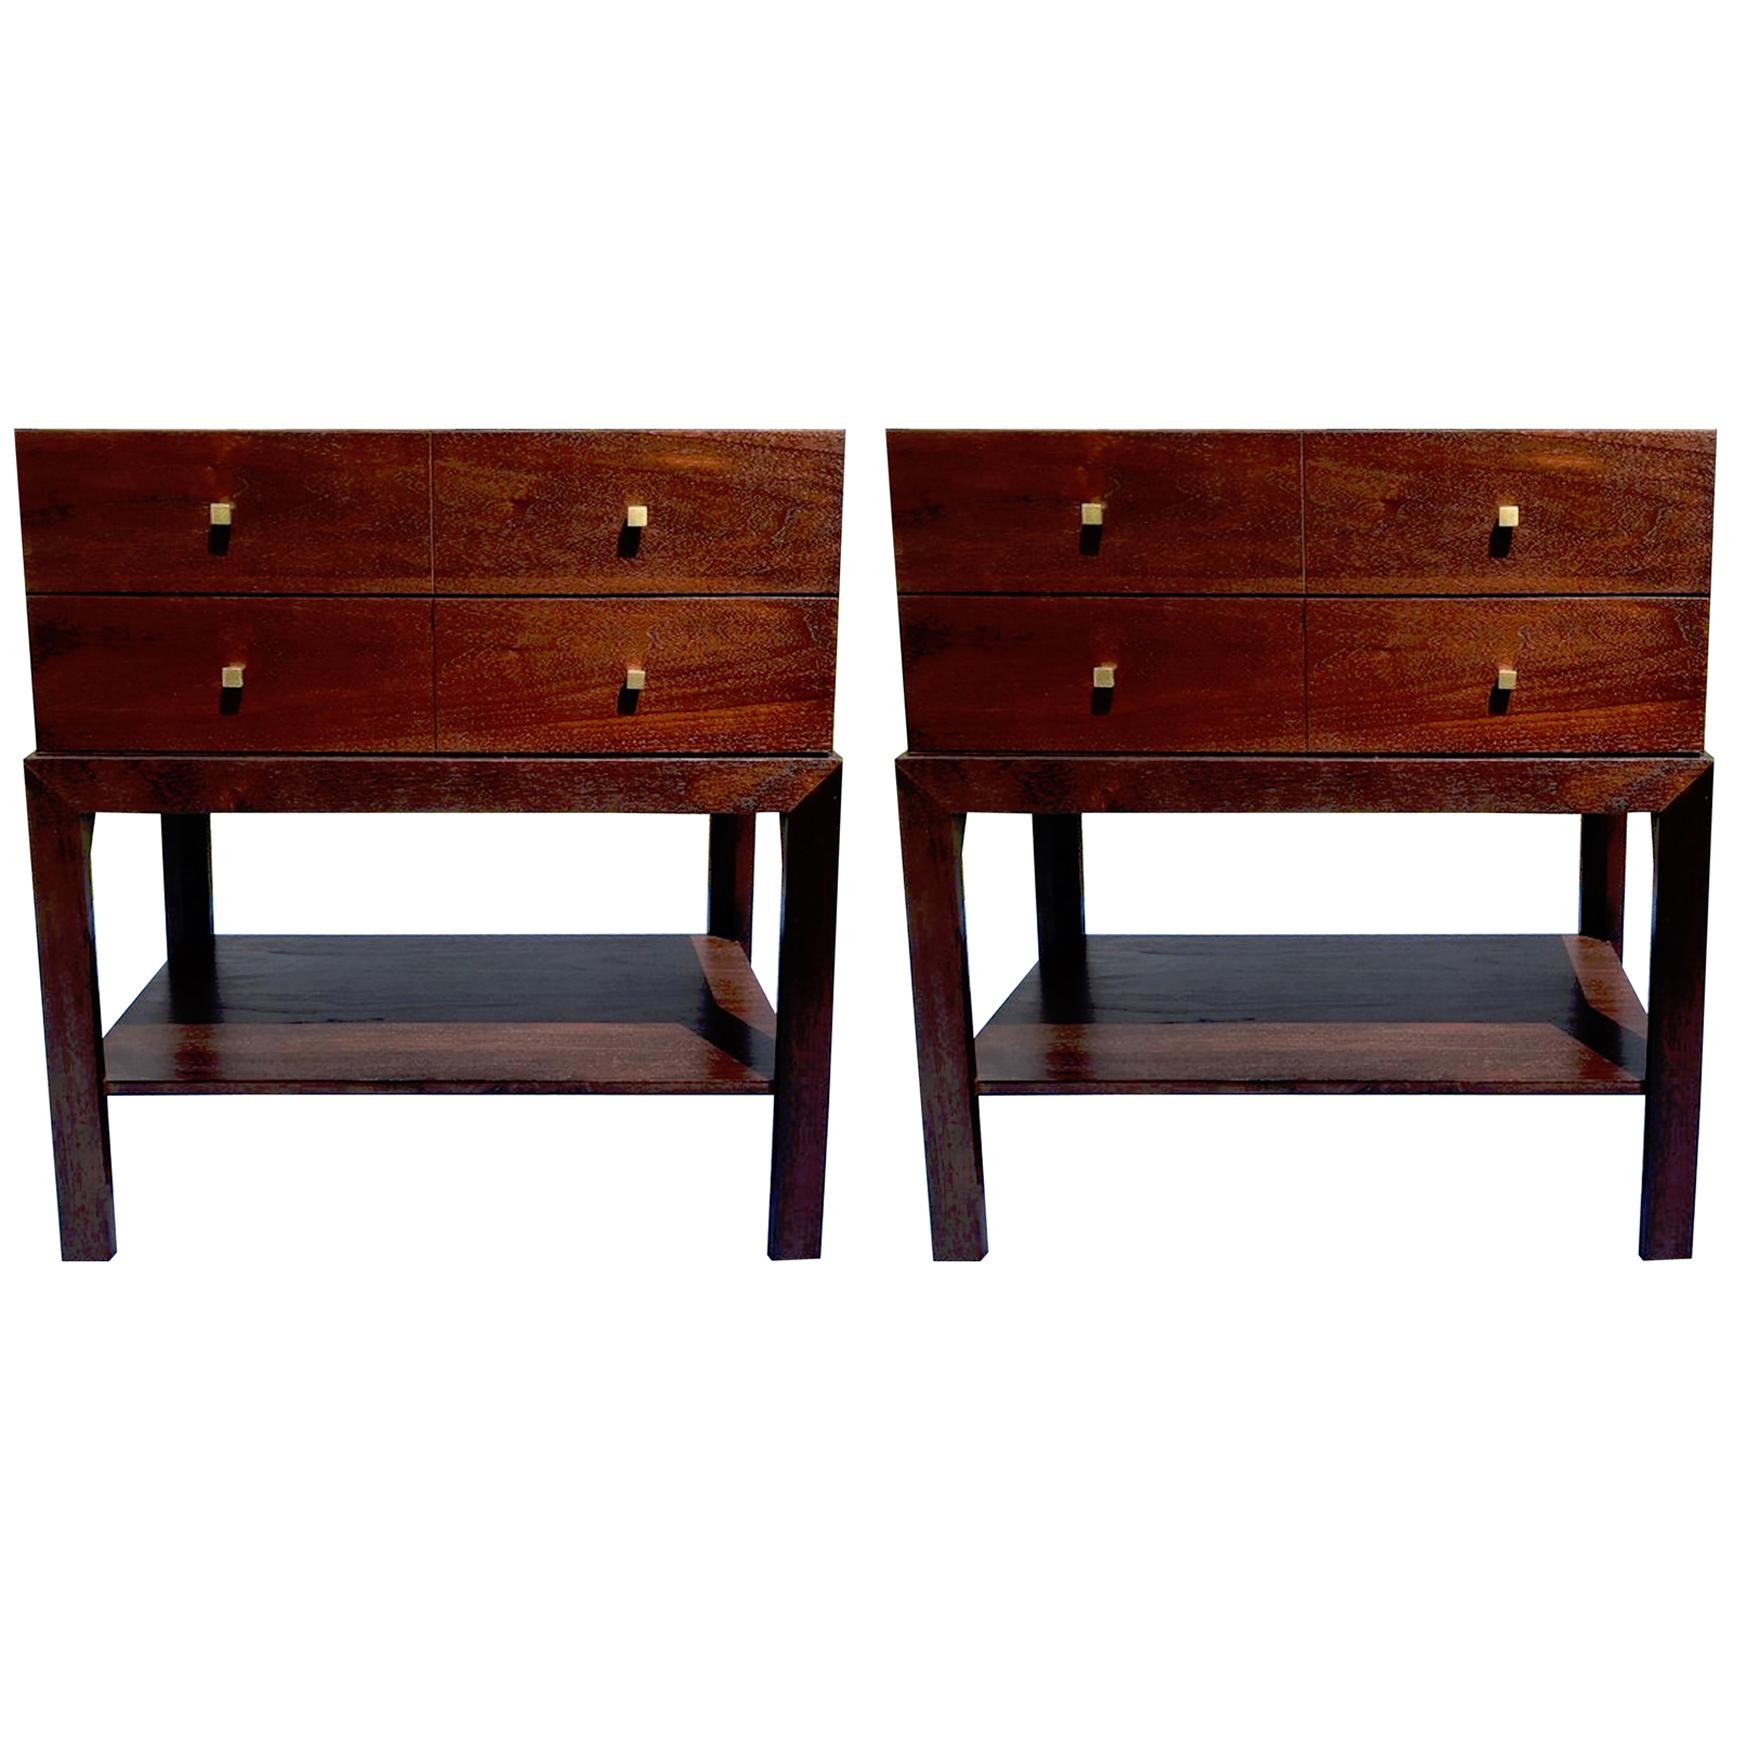 Pair of Parzinger Style Nightstands